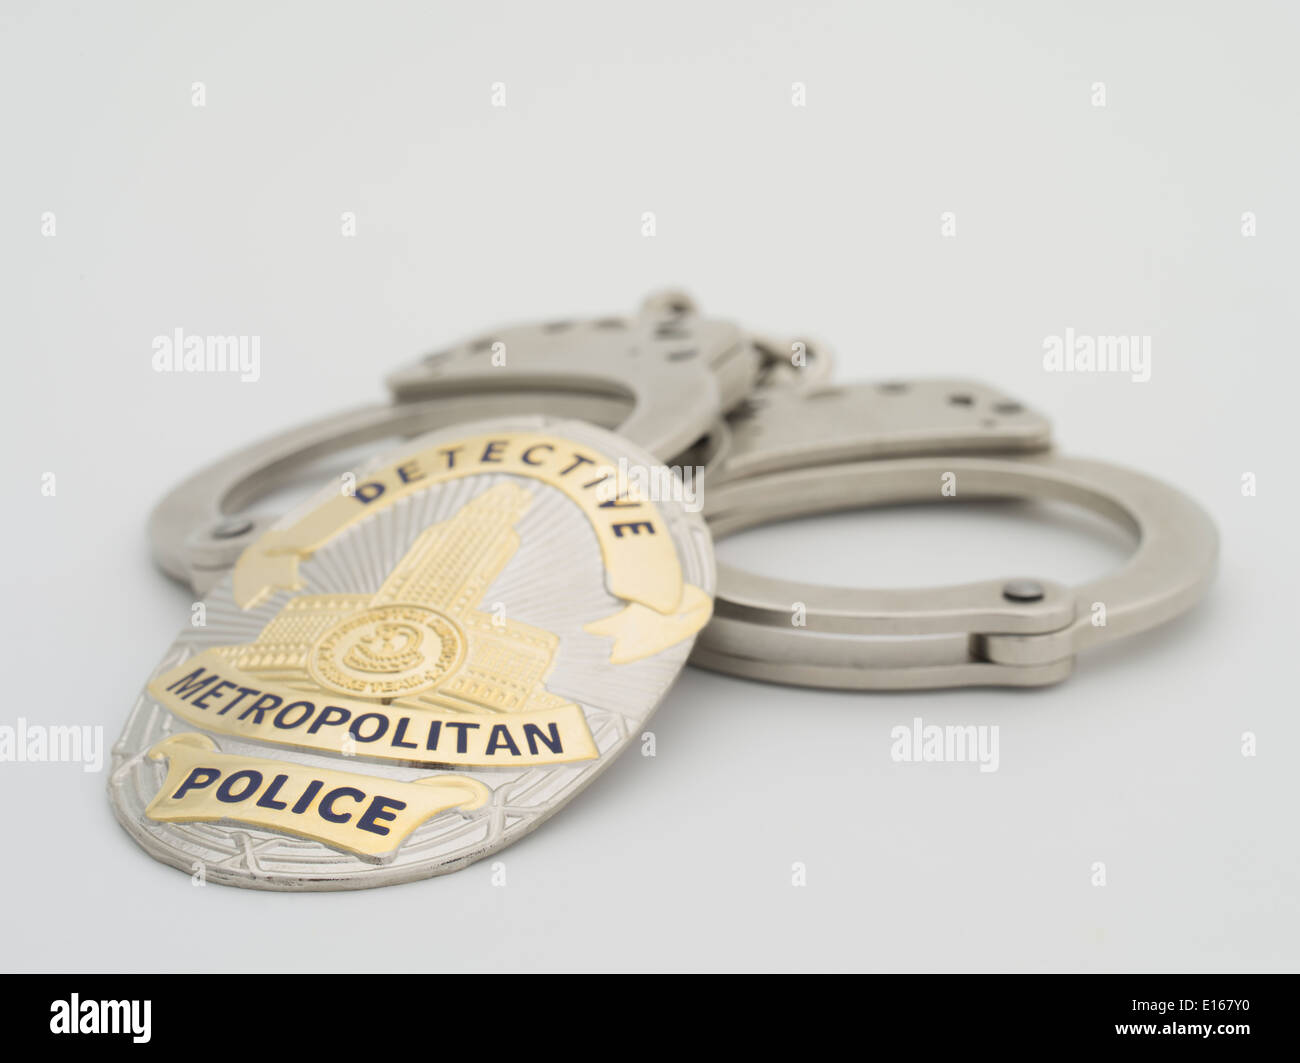 Metropolitan Police Detective Shield with Smith & Wesson Police issue handcuffs Stock Photo